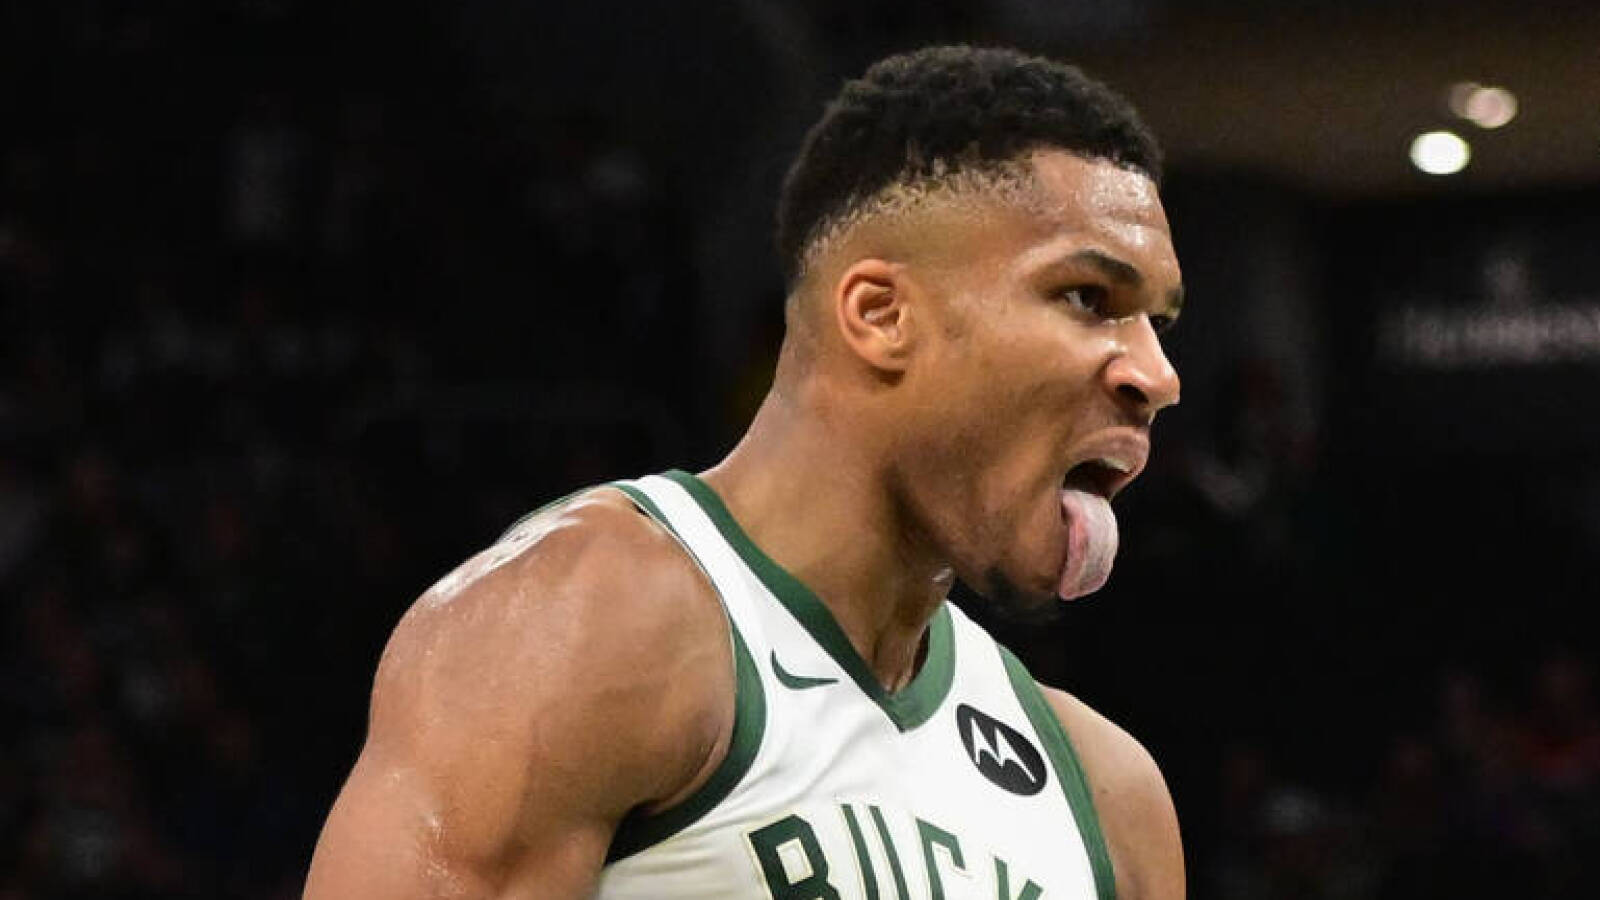 Giannis Antetokounmpo signs three-year extension with Bucks worth $186M